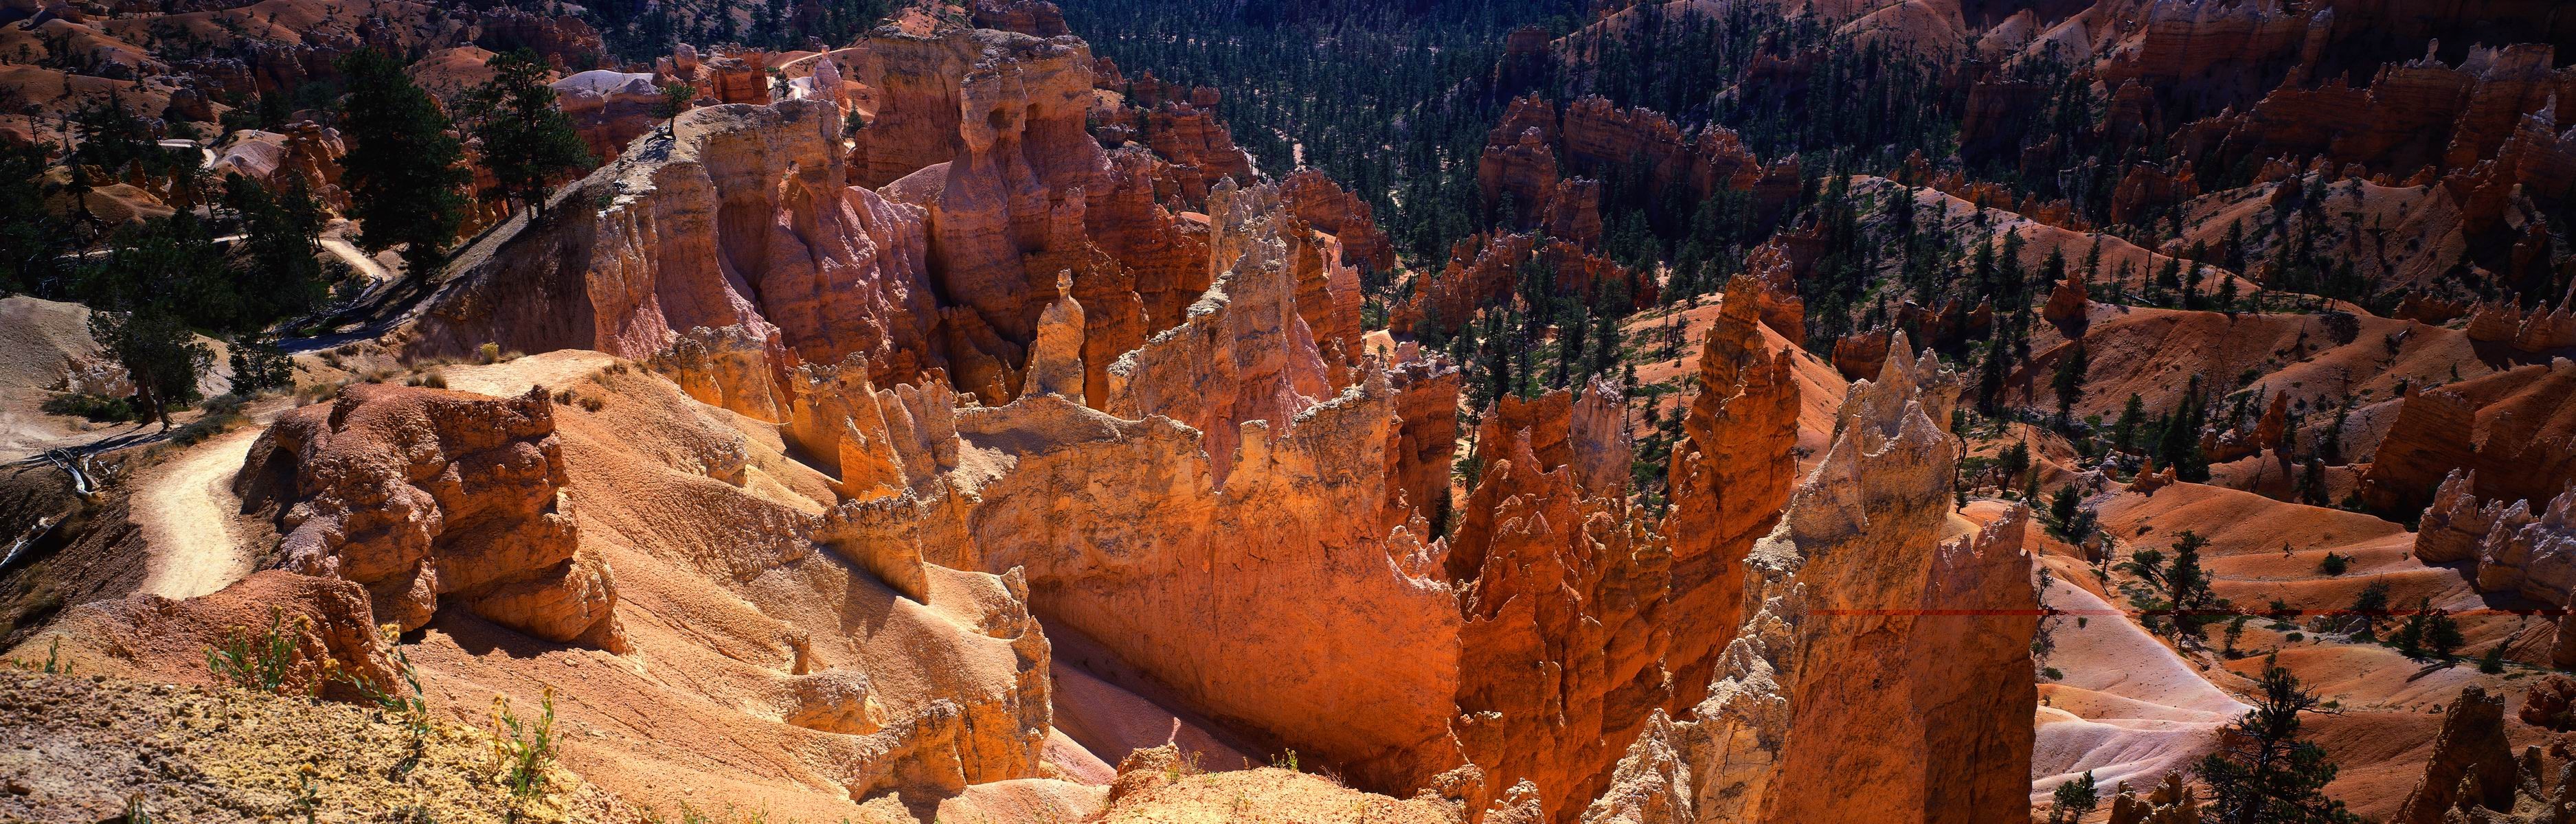 General 3750x1200 landscape dual monitors rock formation top view Bryce Canyon National Park Utah mountains USA rocks nature